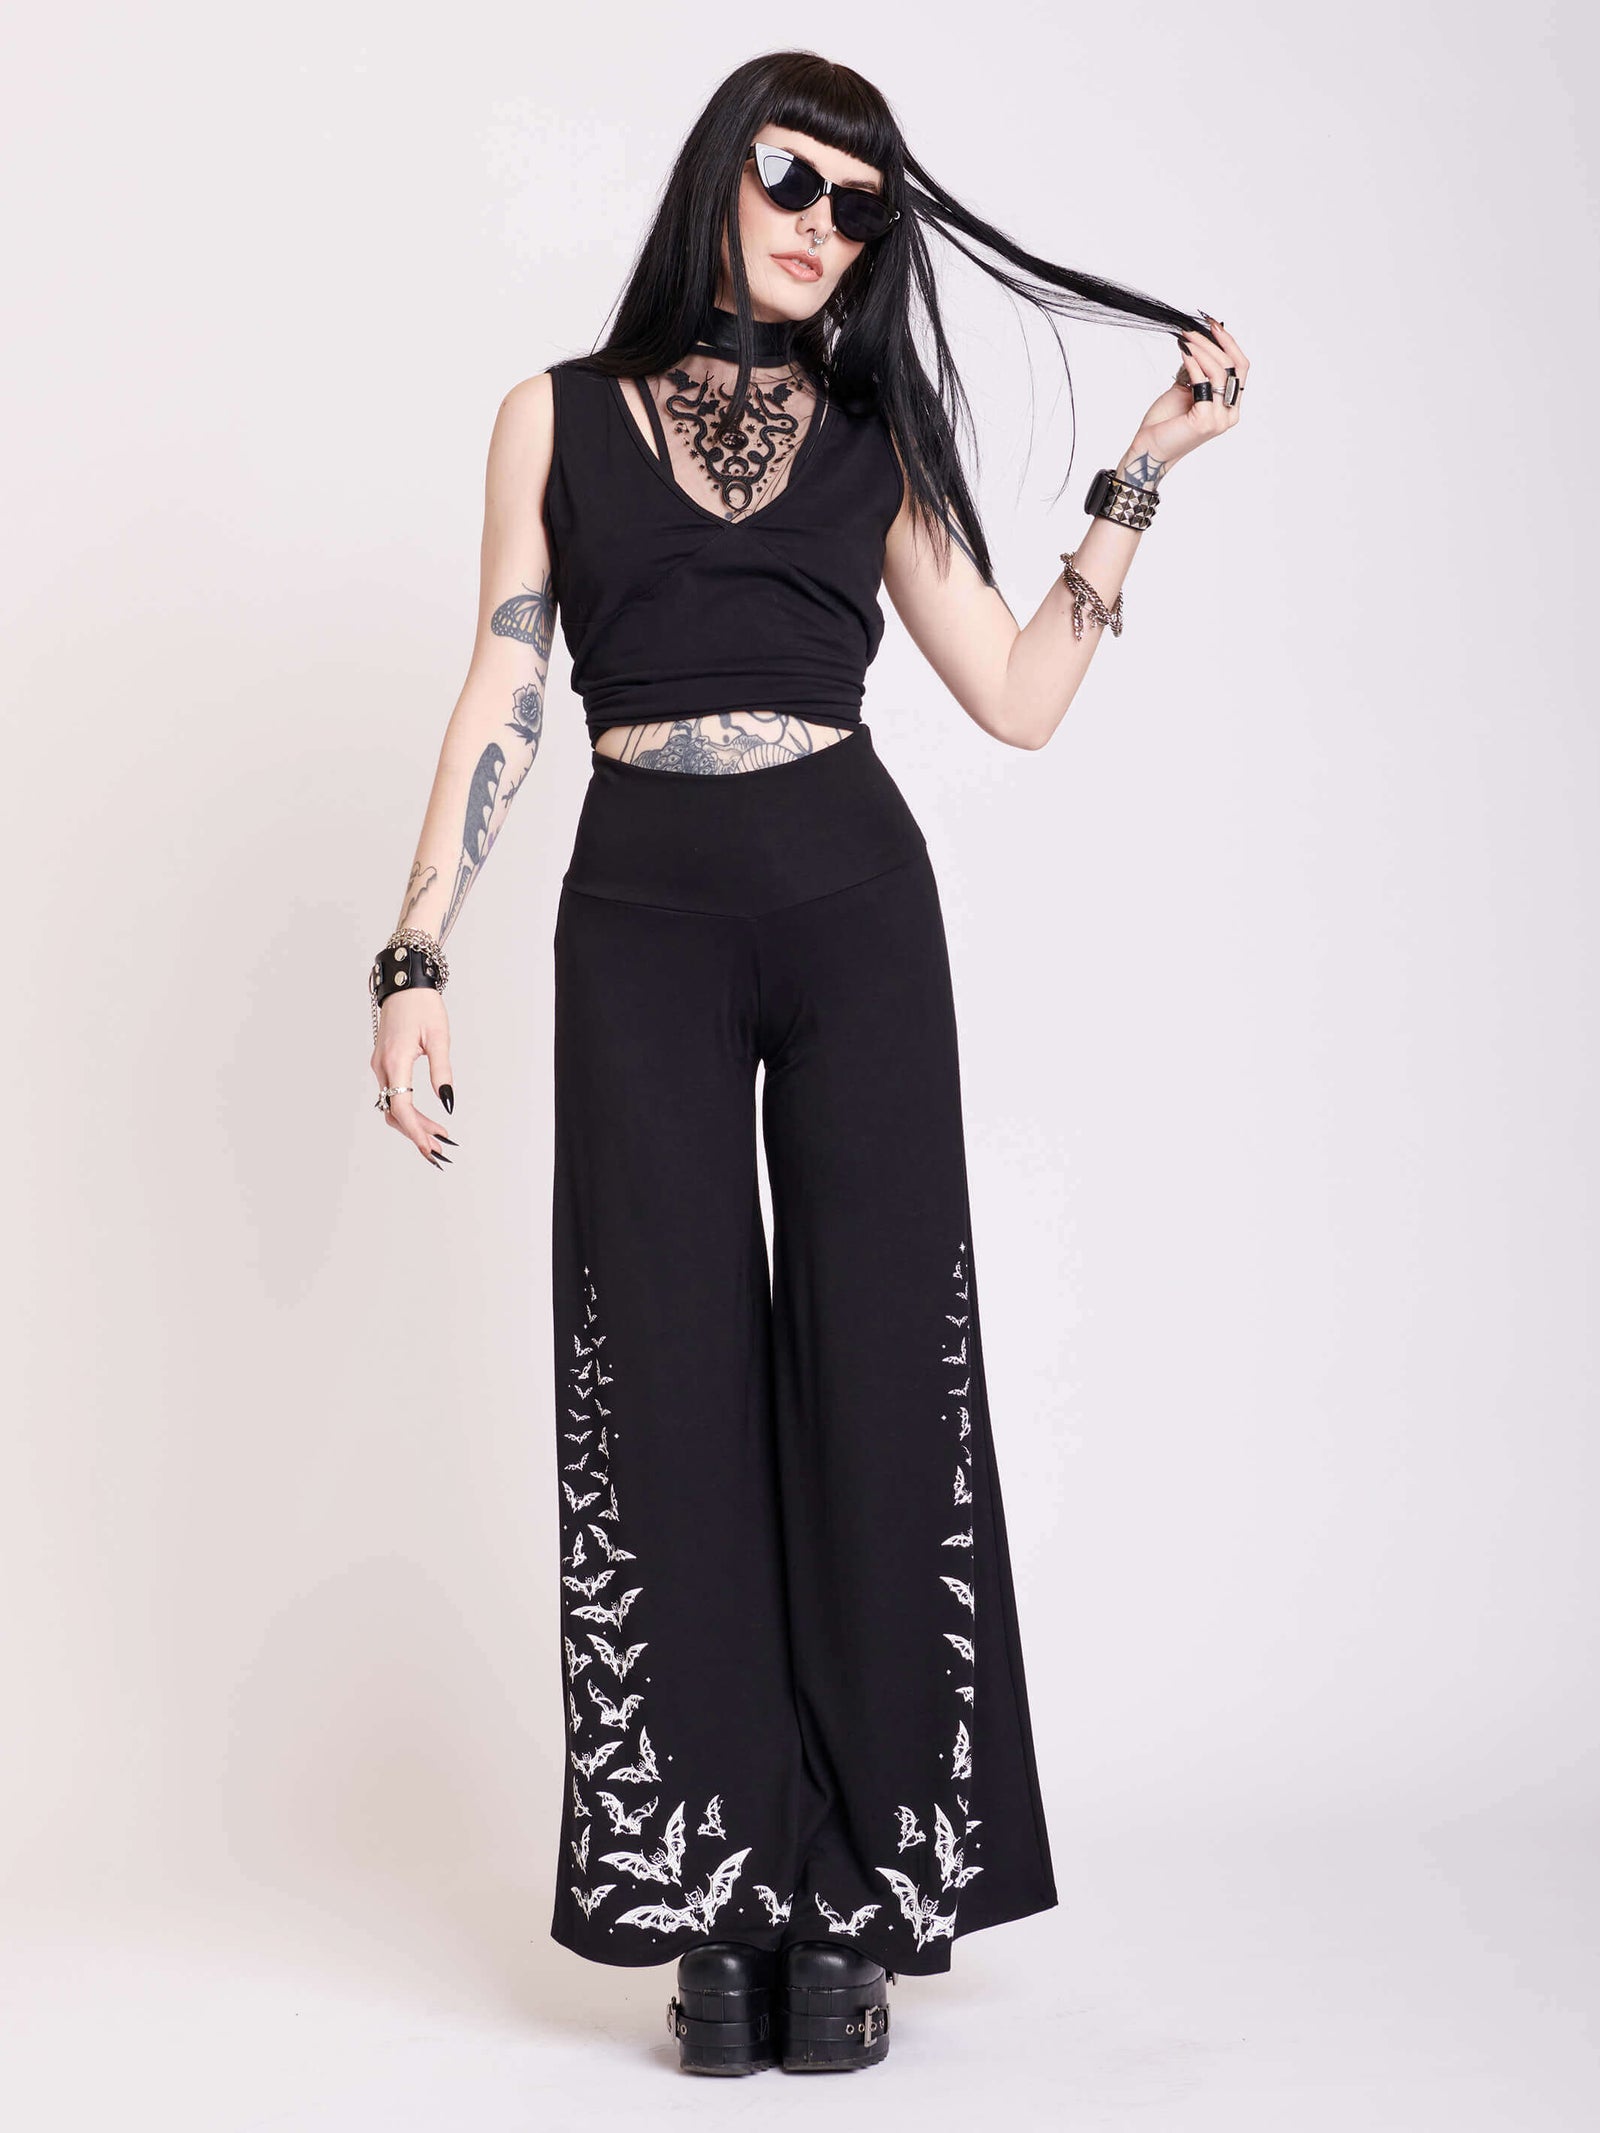 InsGoth Punk Streetwear Red Plaid Striaght Pant Women Gothic Harajuku High  Waist Long Trousers Casual Partwork